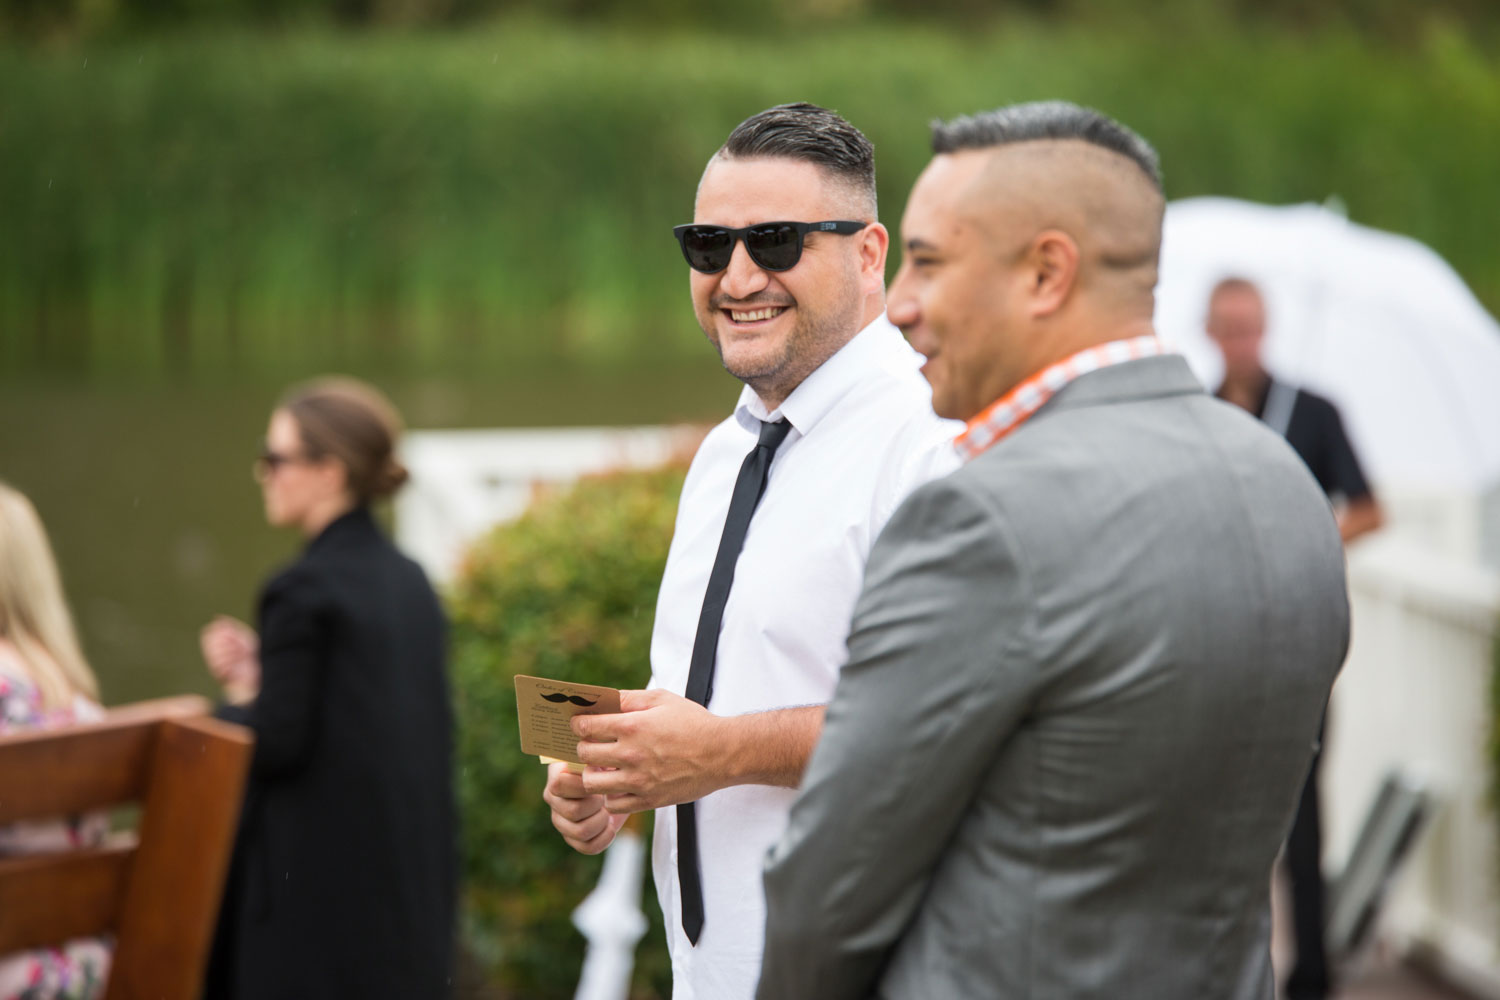 gracehill auckland wedding guests laughing